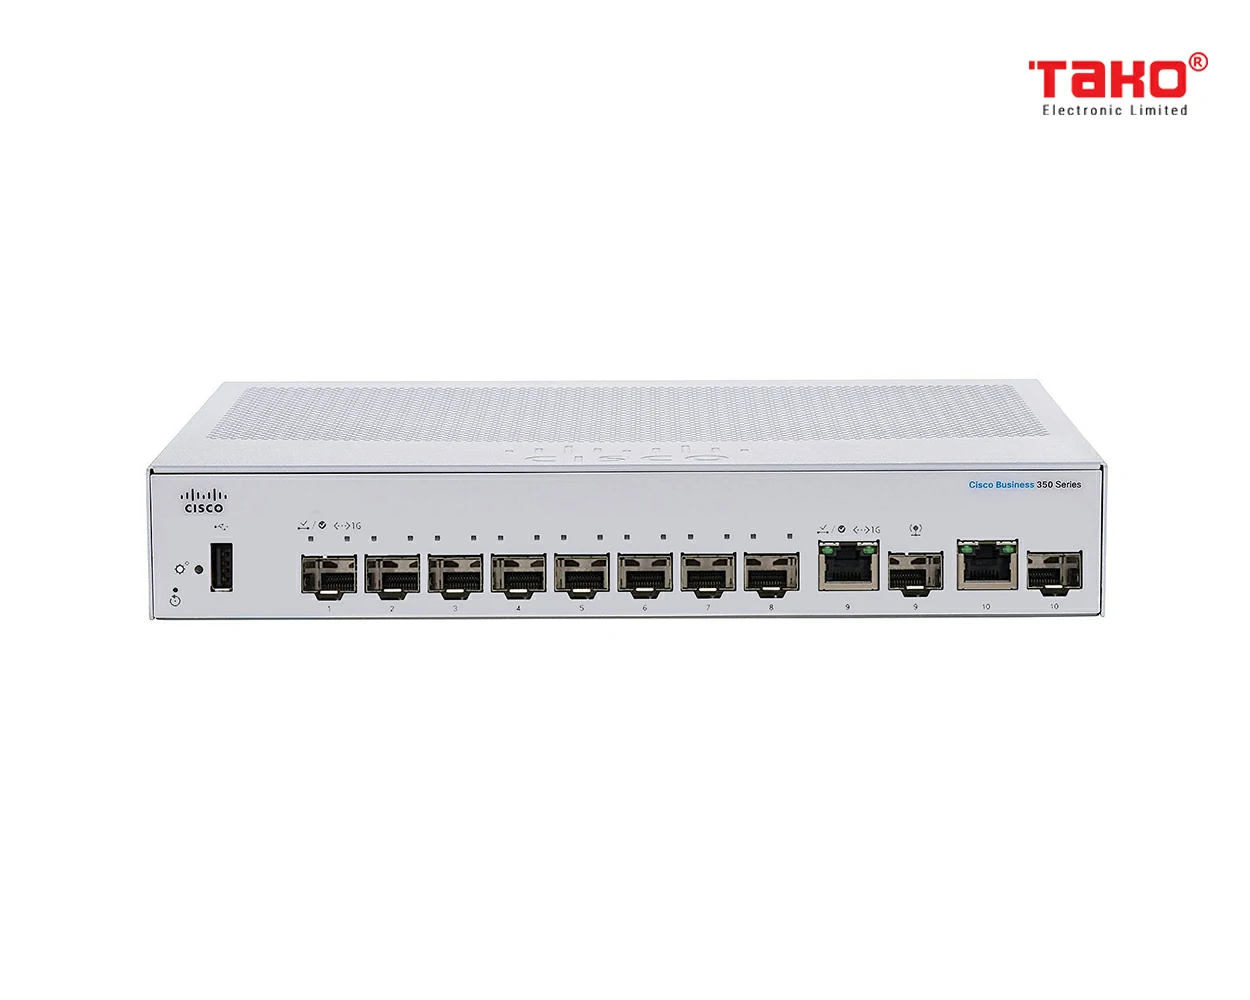 Cisco CBS350-8S-E-2G Manageable Layer 3 Web Switch 8 x 1 Gbps SFP + 2 x 1 GbE/SFP combo ports 1